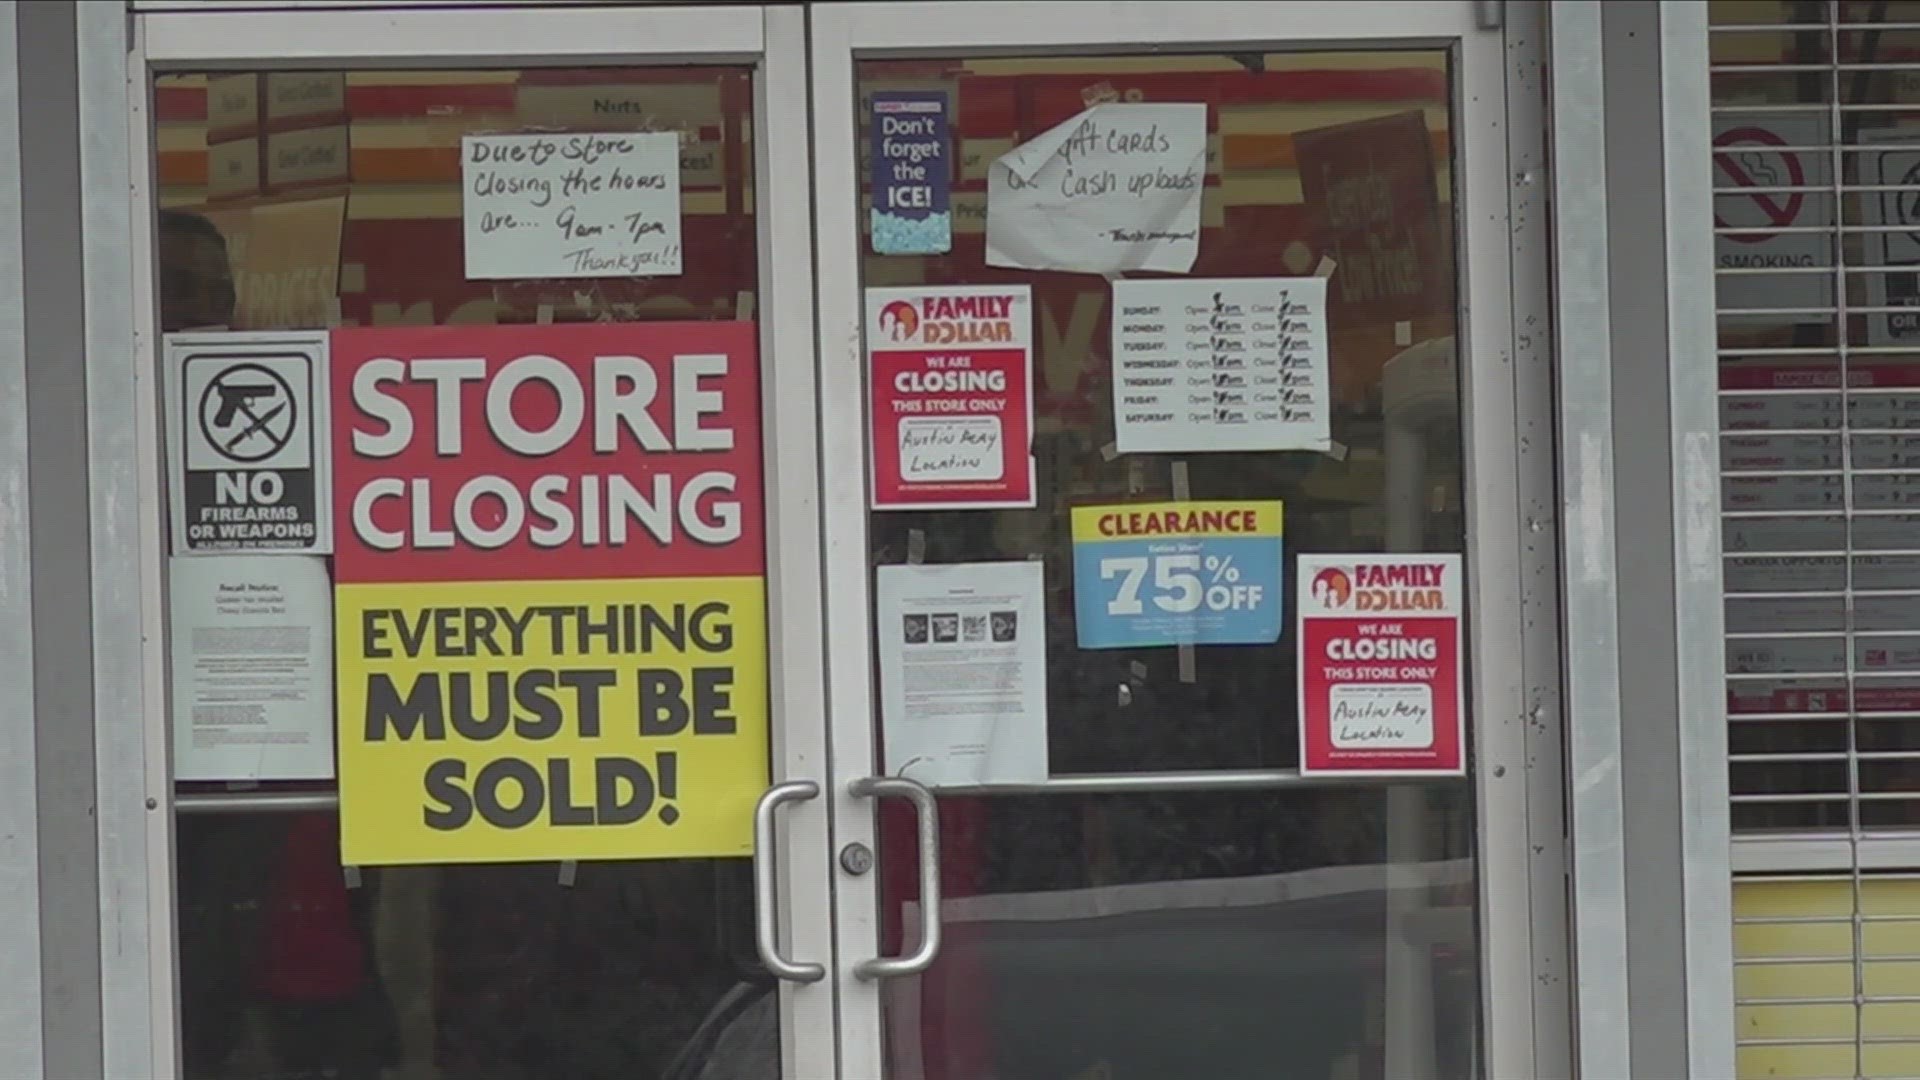 The company previously announced the closure of hundreds of Family Dollar and Dollar Tree stores nationwide.